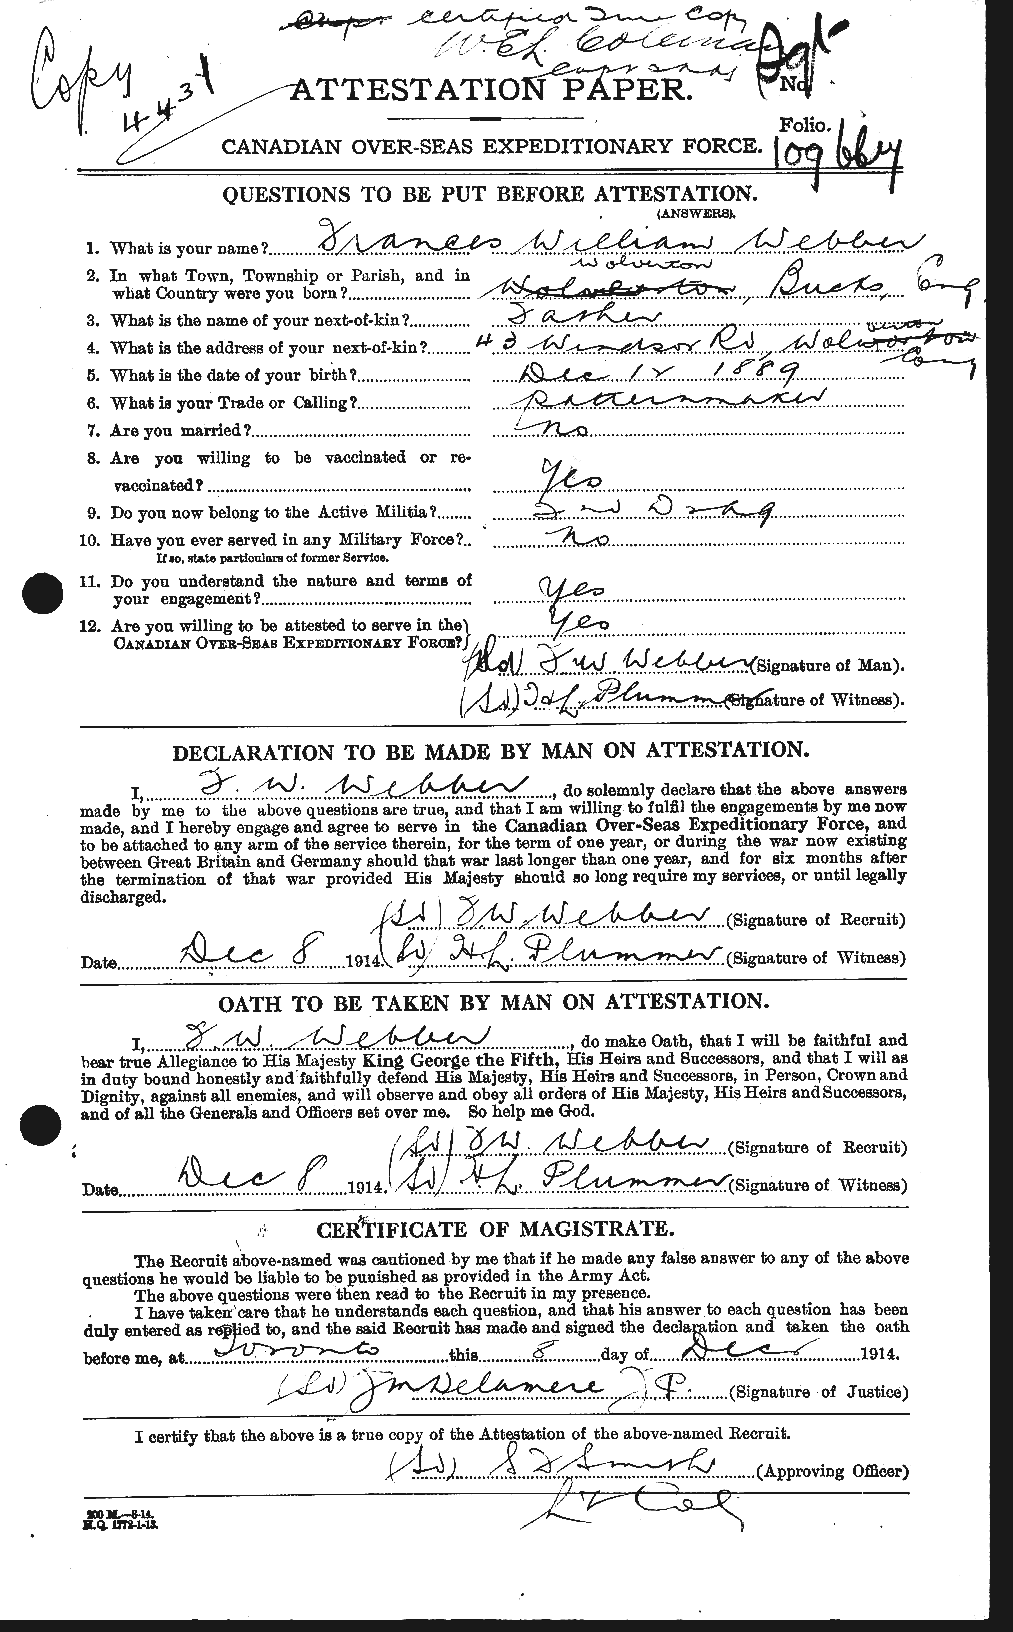 Personnel Records of the First World War - CEF 663371a